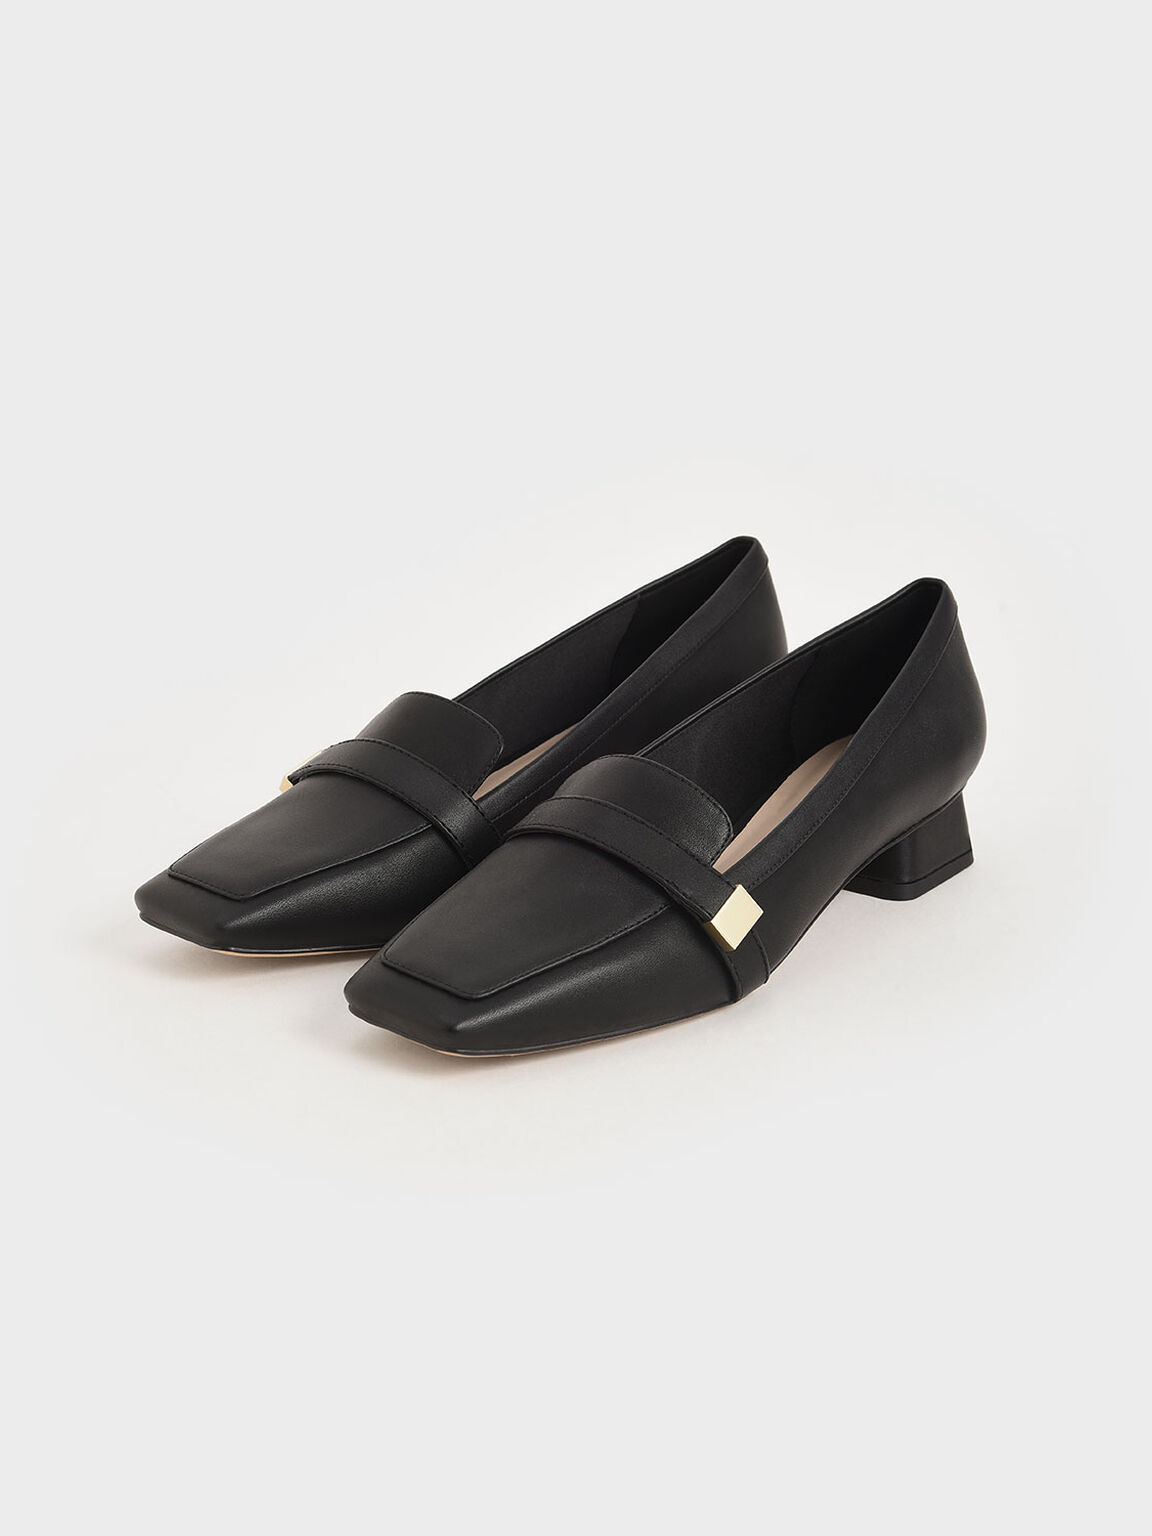 Square Toe Penny Loafers, Black, hi-res